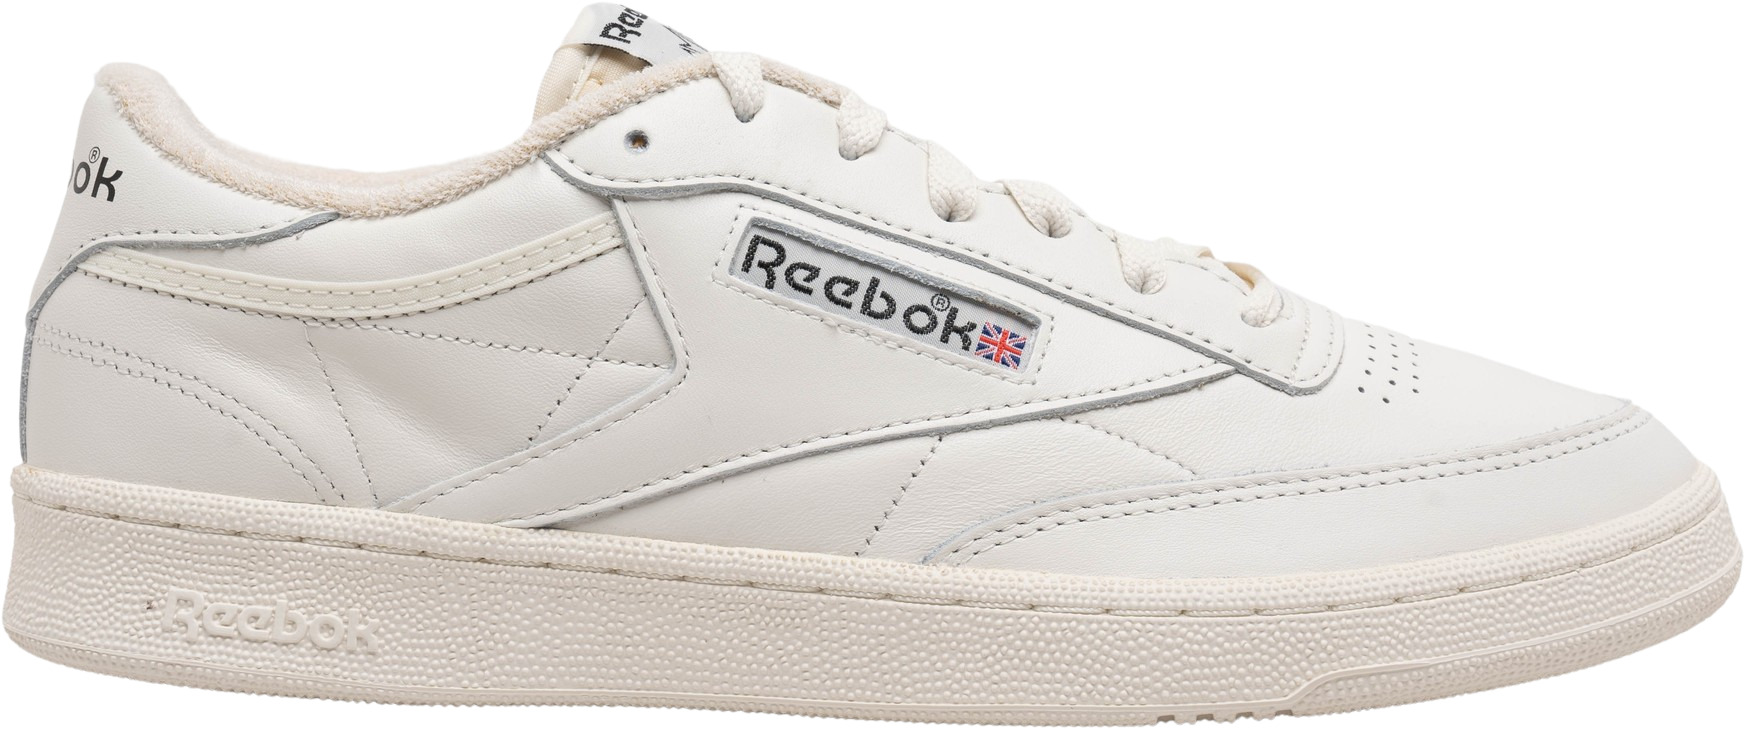 Reebok Club C 85 Vintage Chalk for Sale | Authenticity Guaranteed